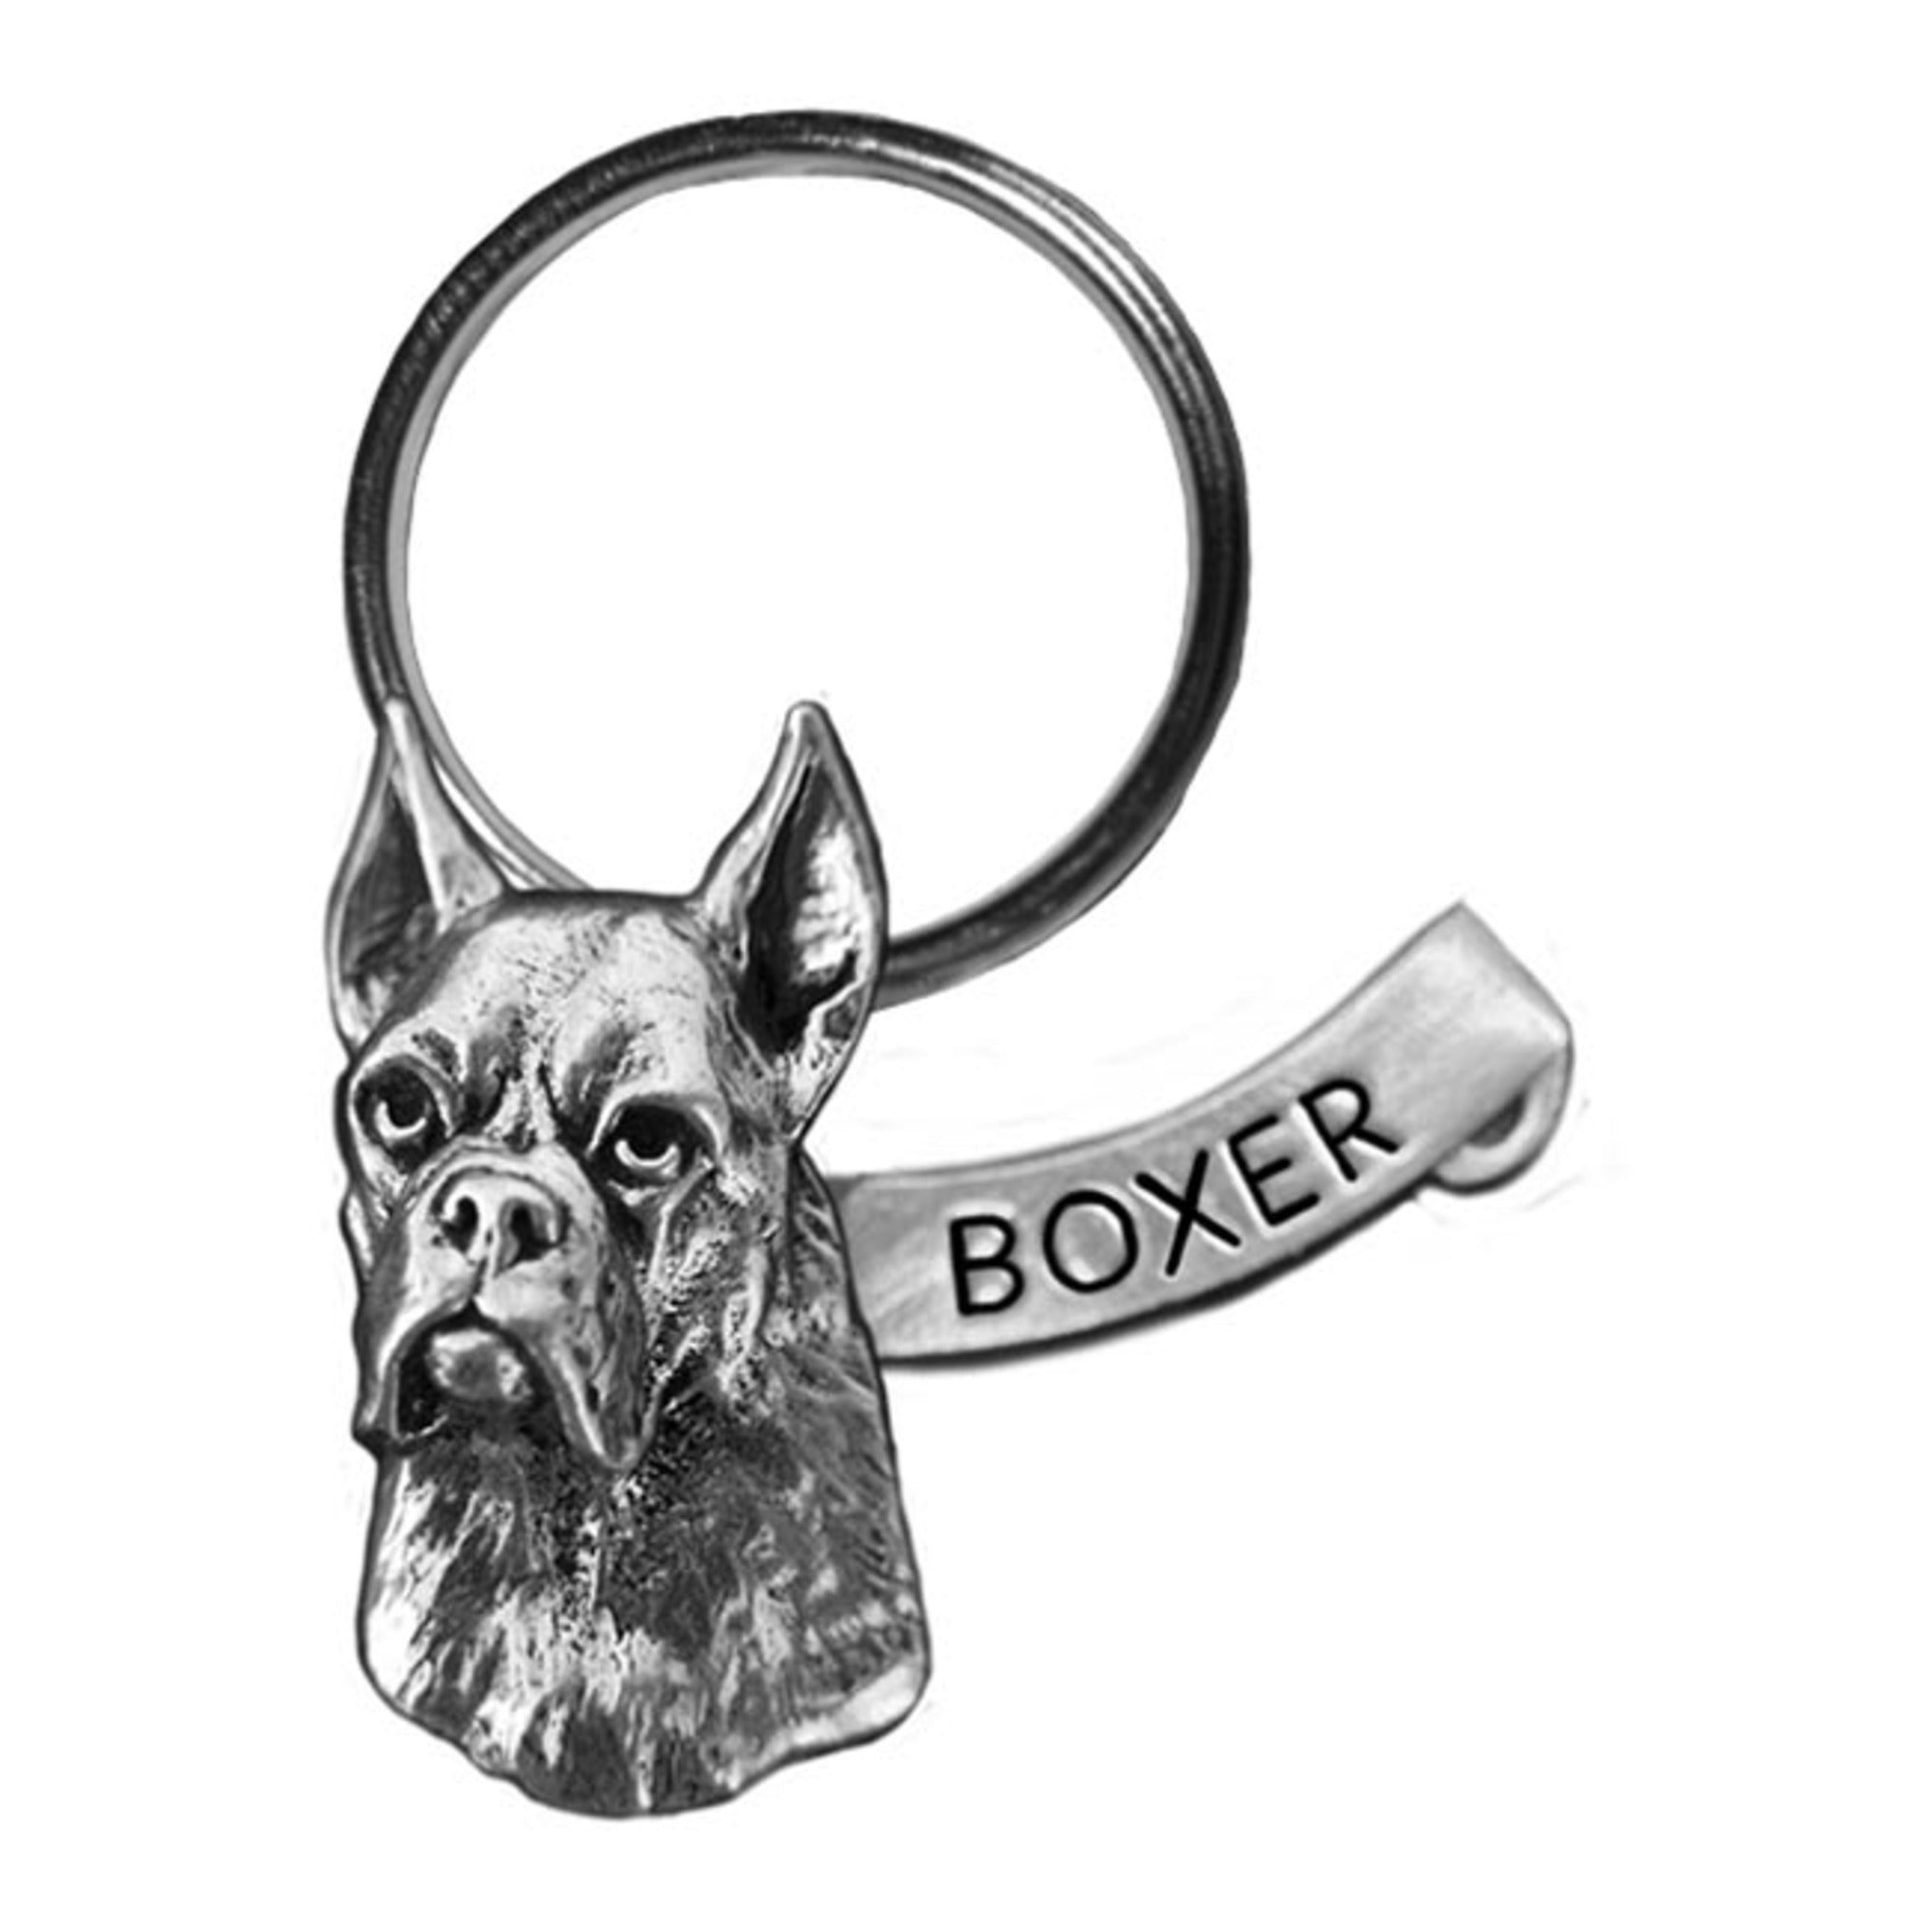 New-Spin Metal Casting Boxer Keychain